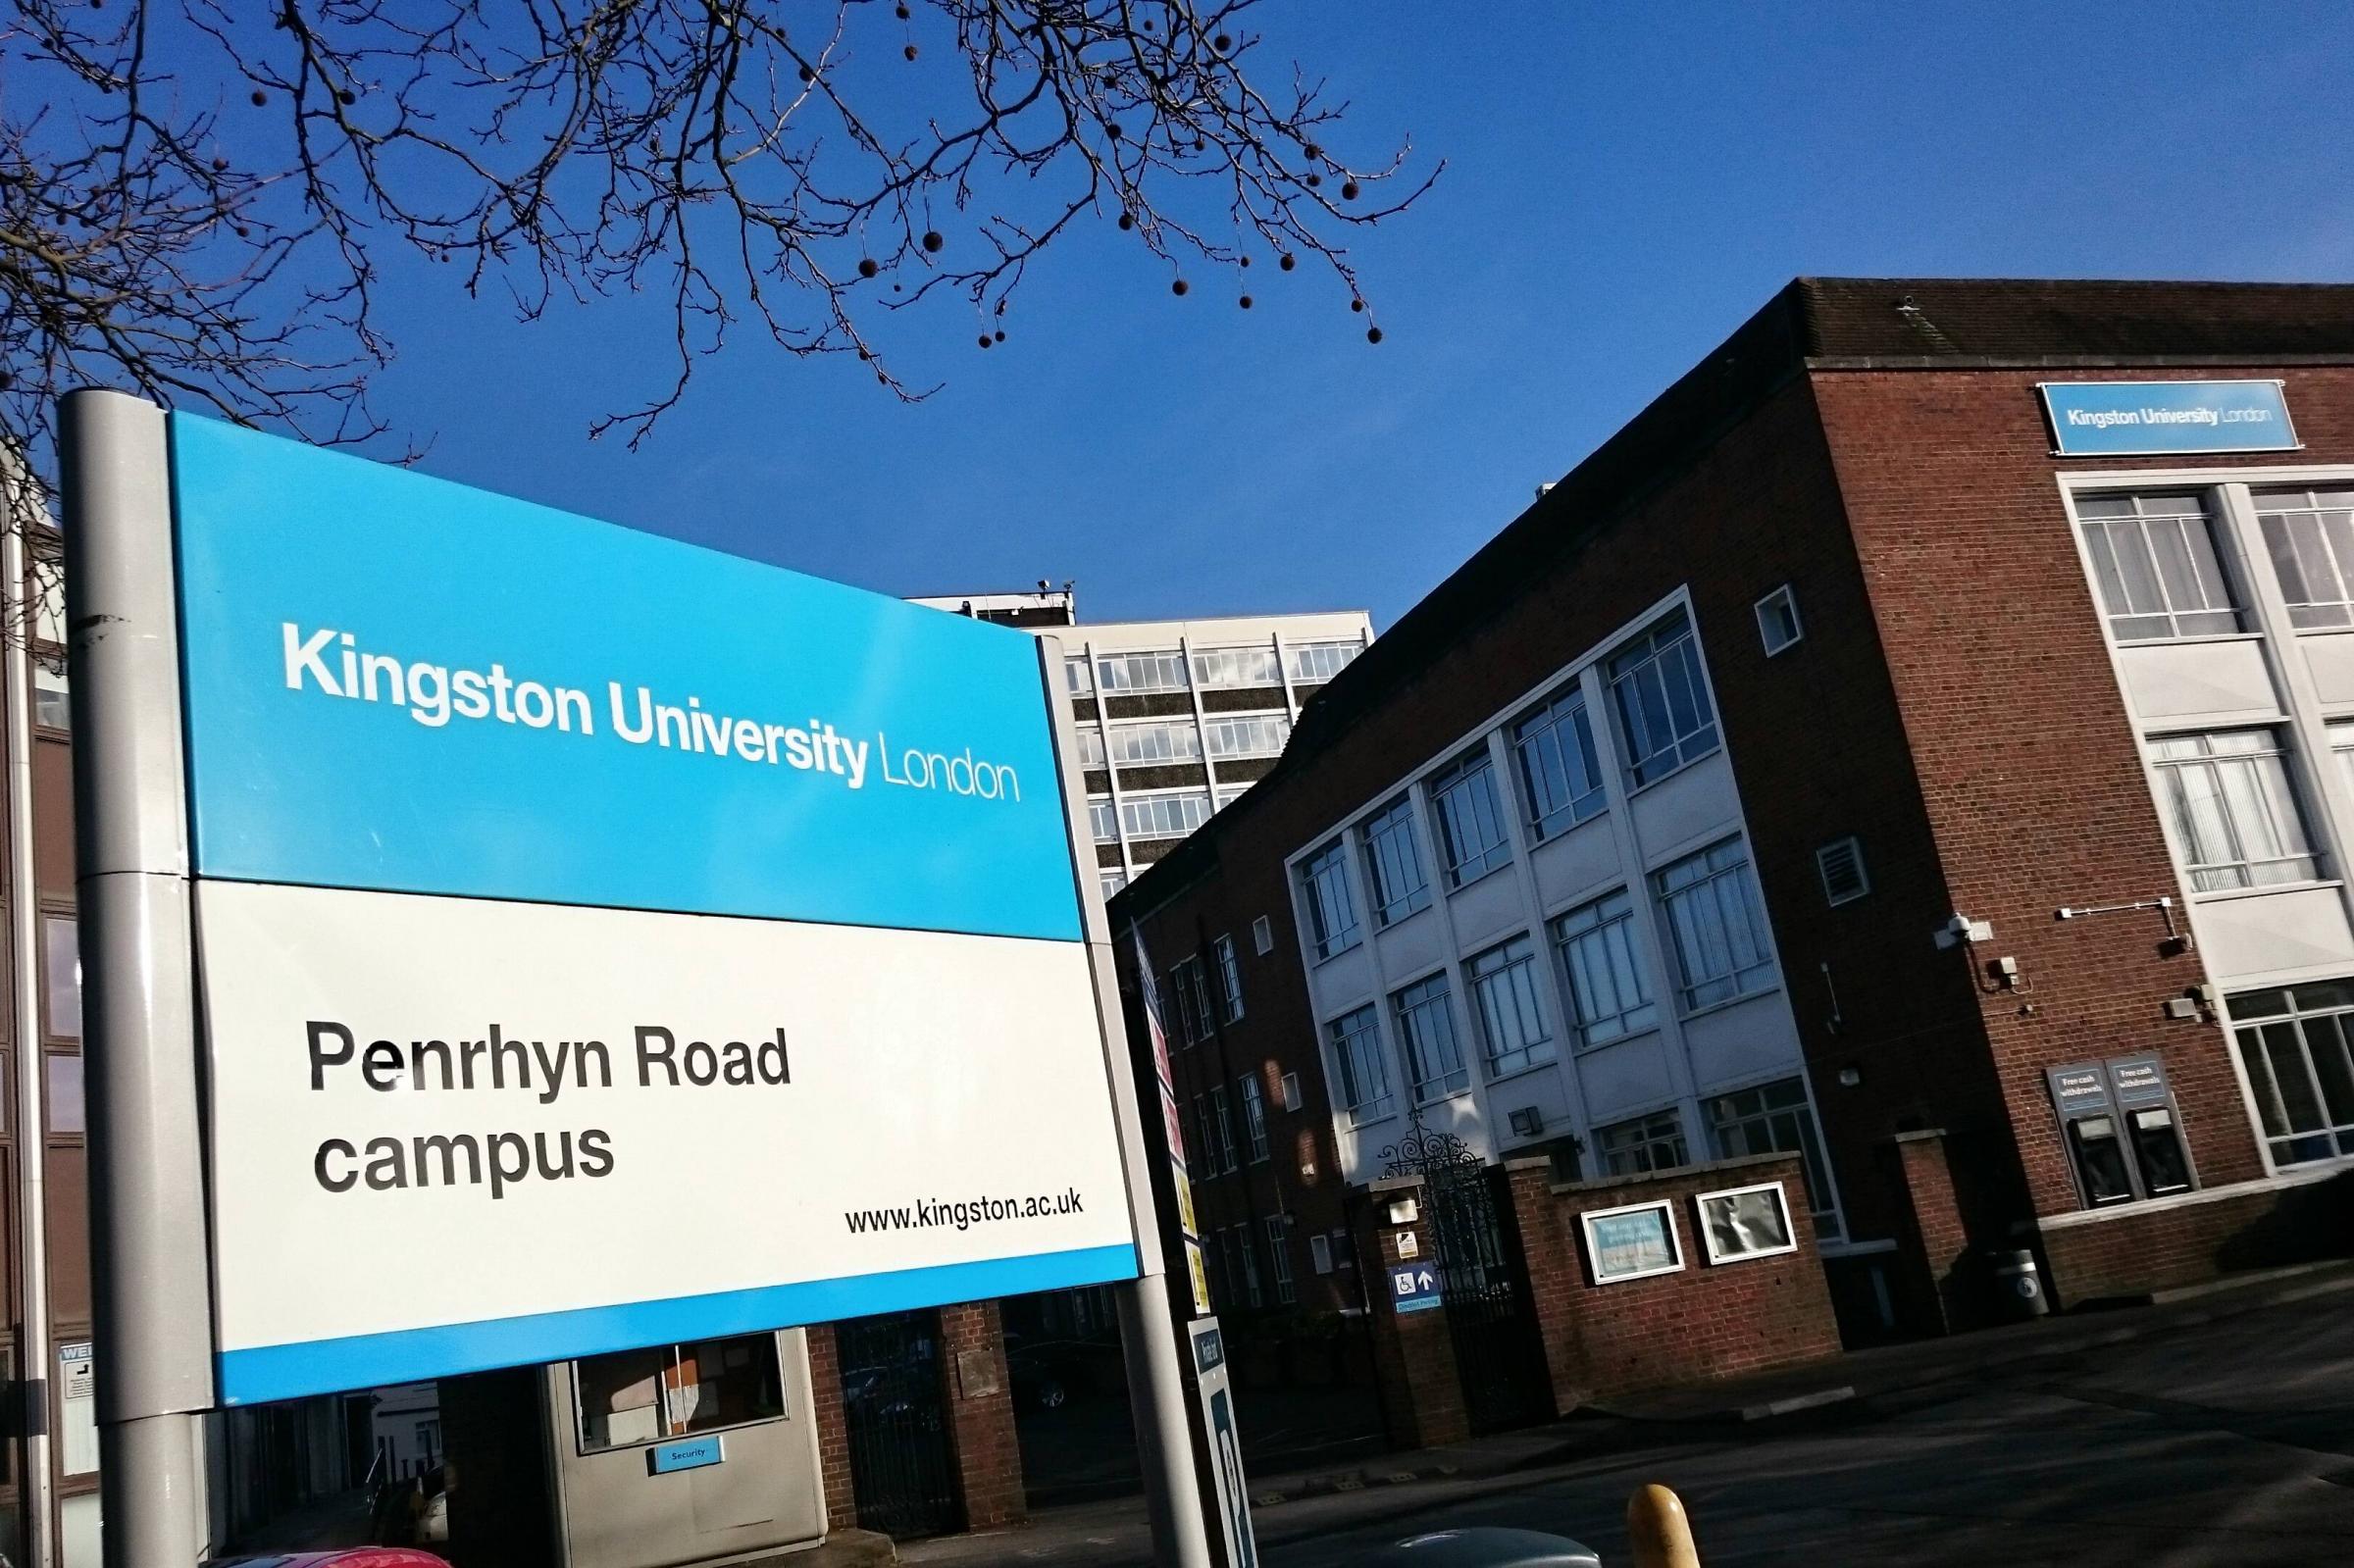 Kingston University Sign for Penrhyn Road campus